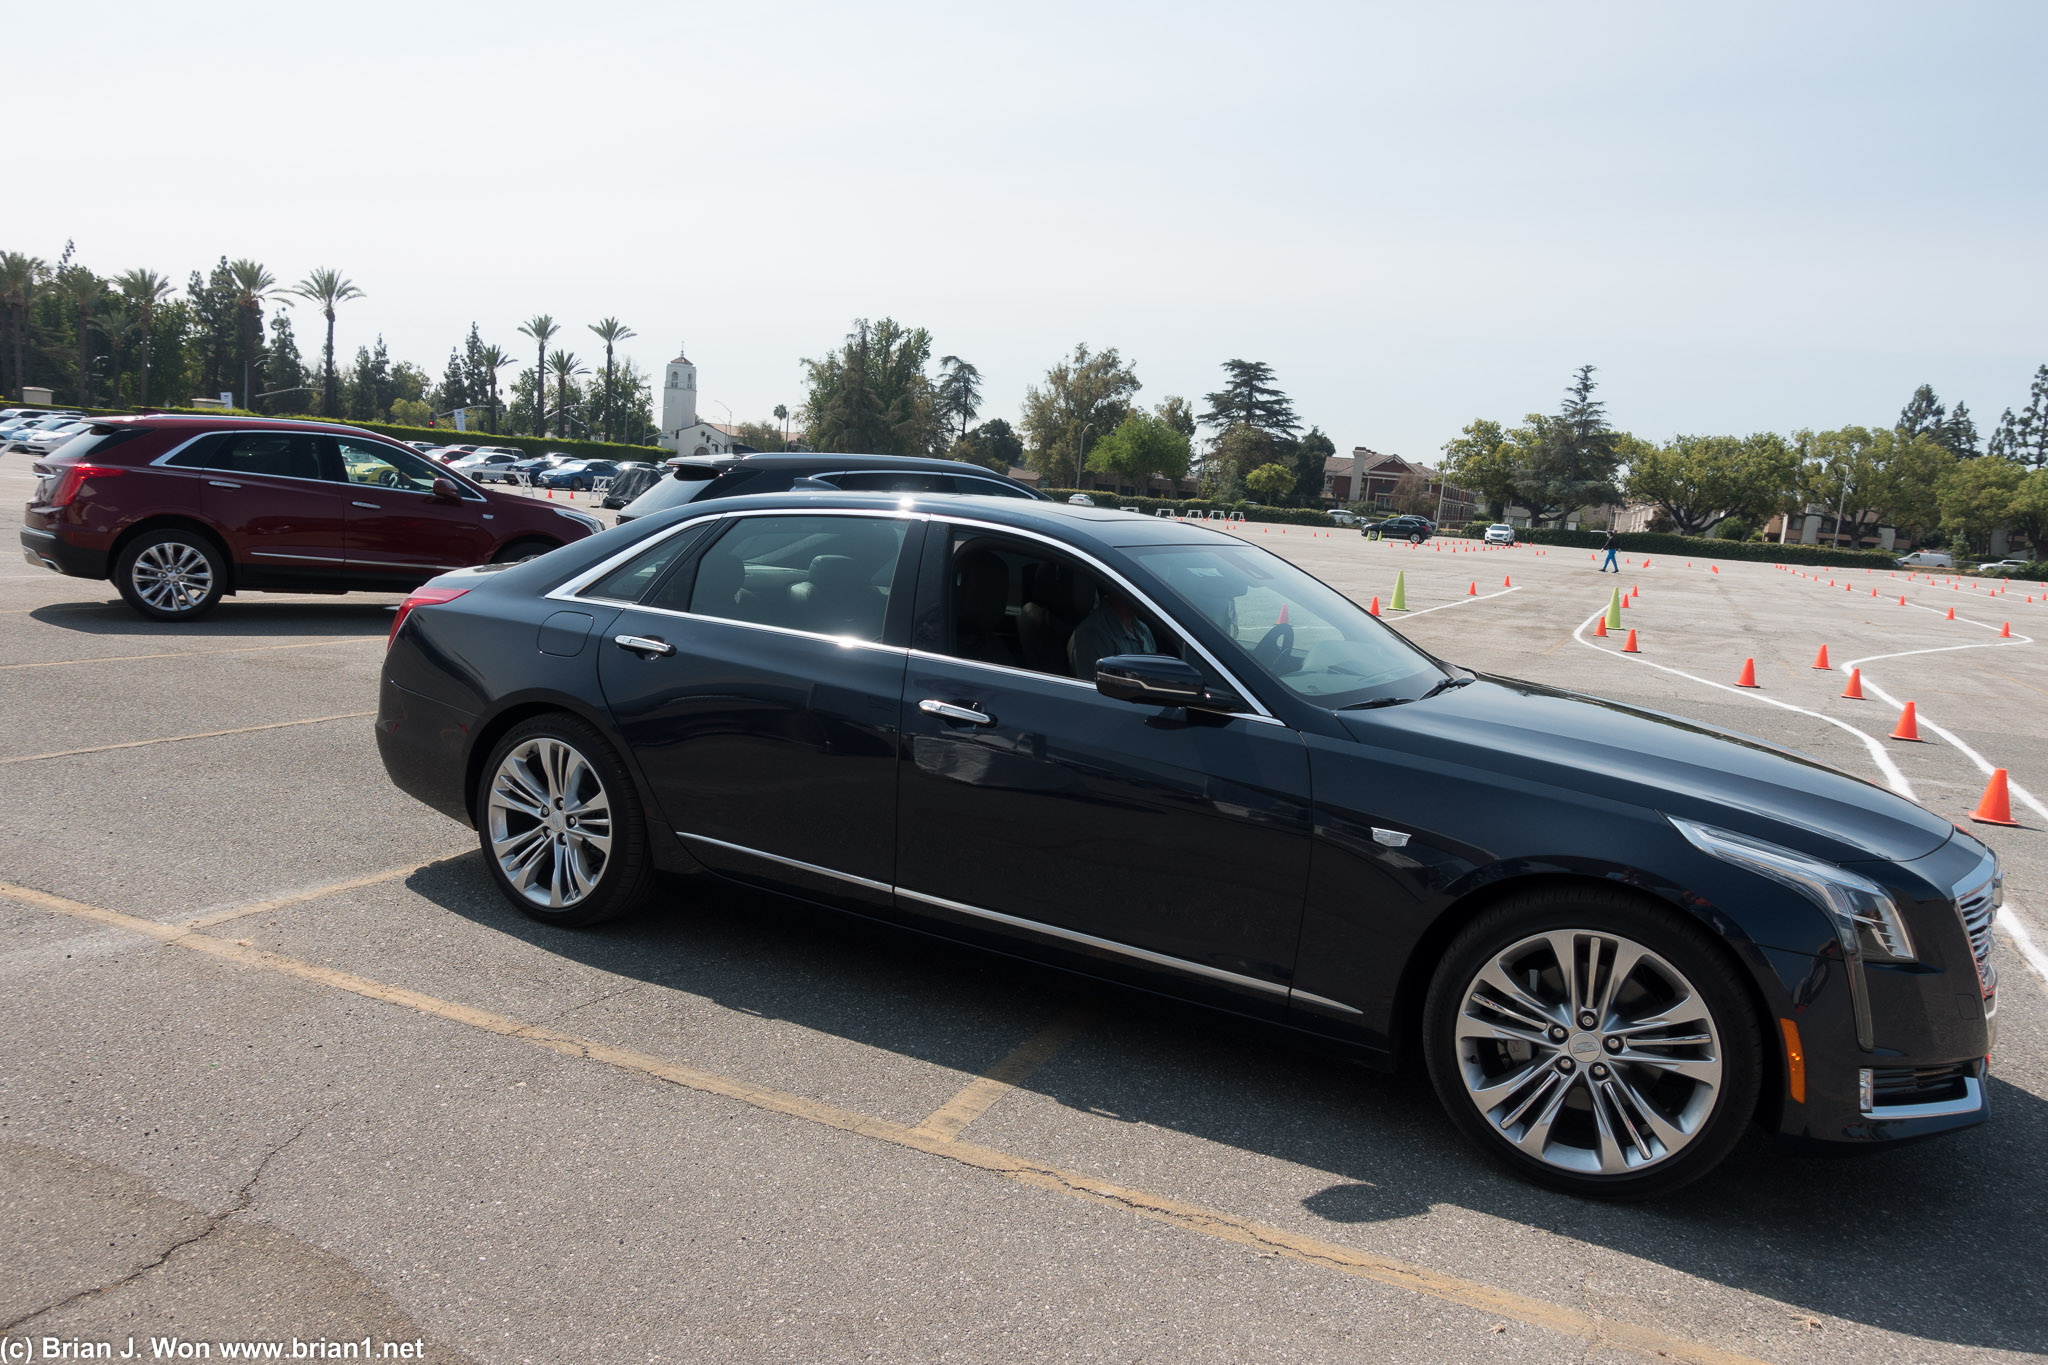 Active Safety course, showing off the rear wheel steering on the CT6.